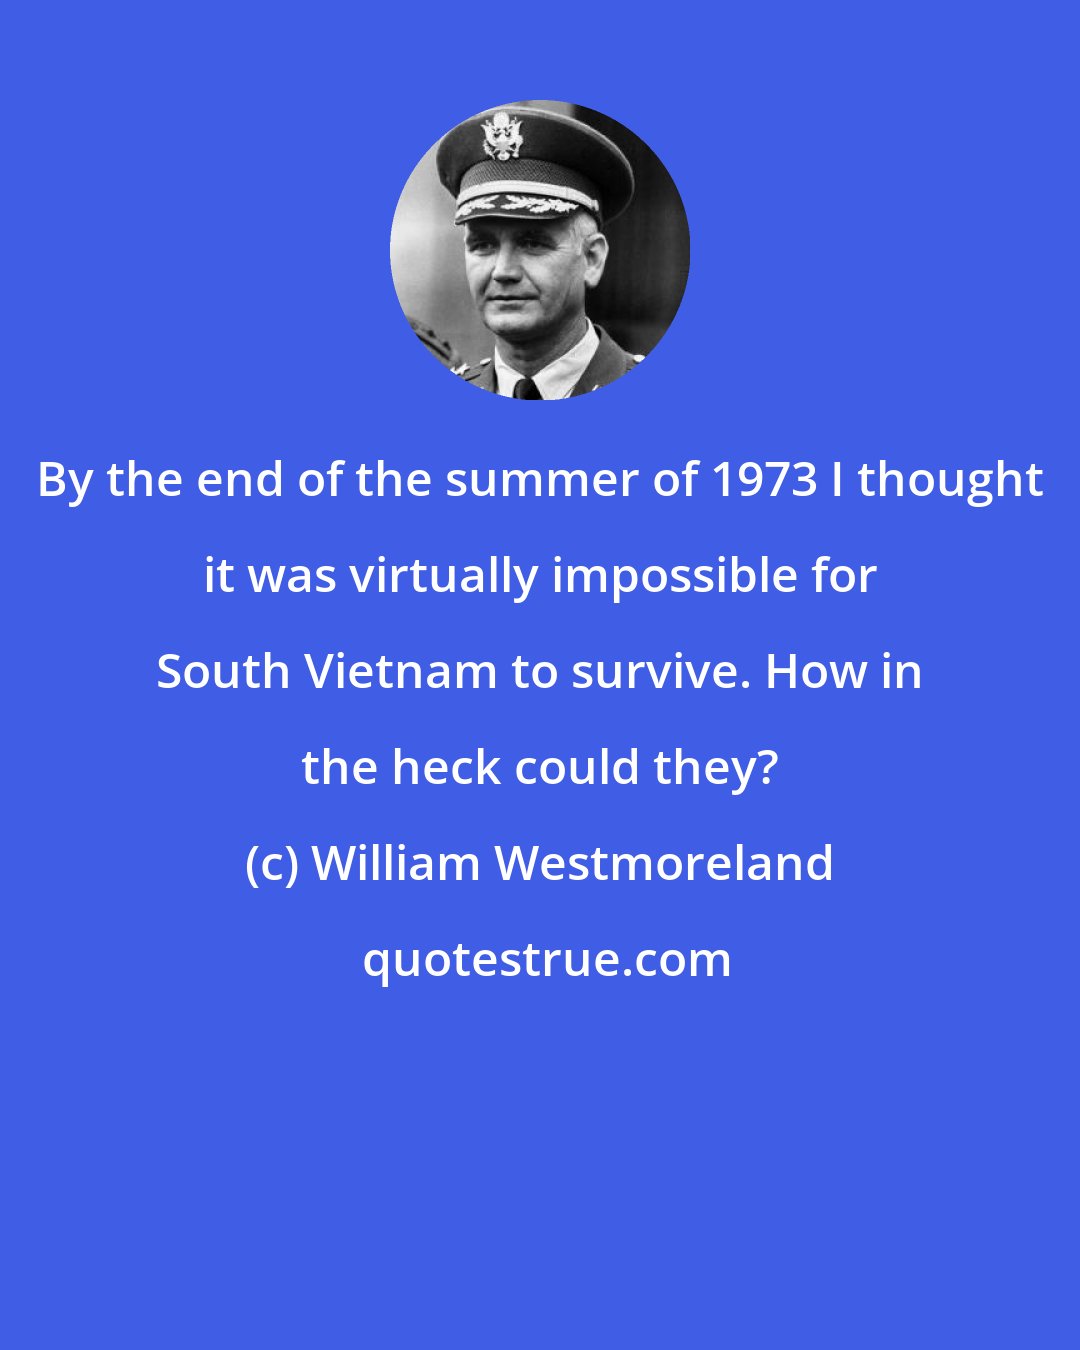 William Westmoreland: By the end of the summer of 1973 I thought it was virtually impossible for South Vietnam to survive. How in the heck could they?